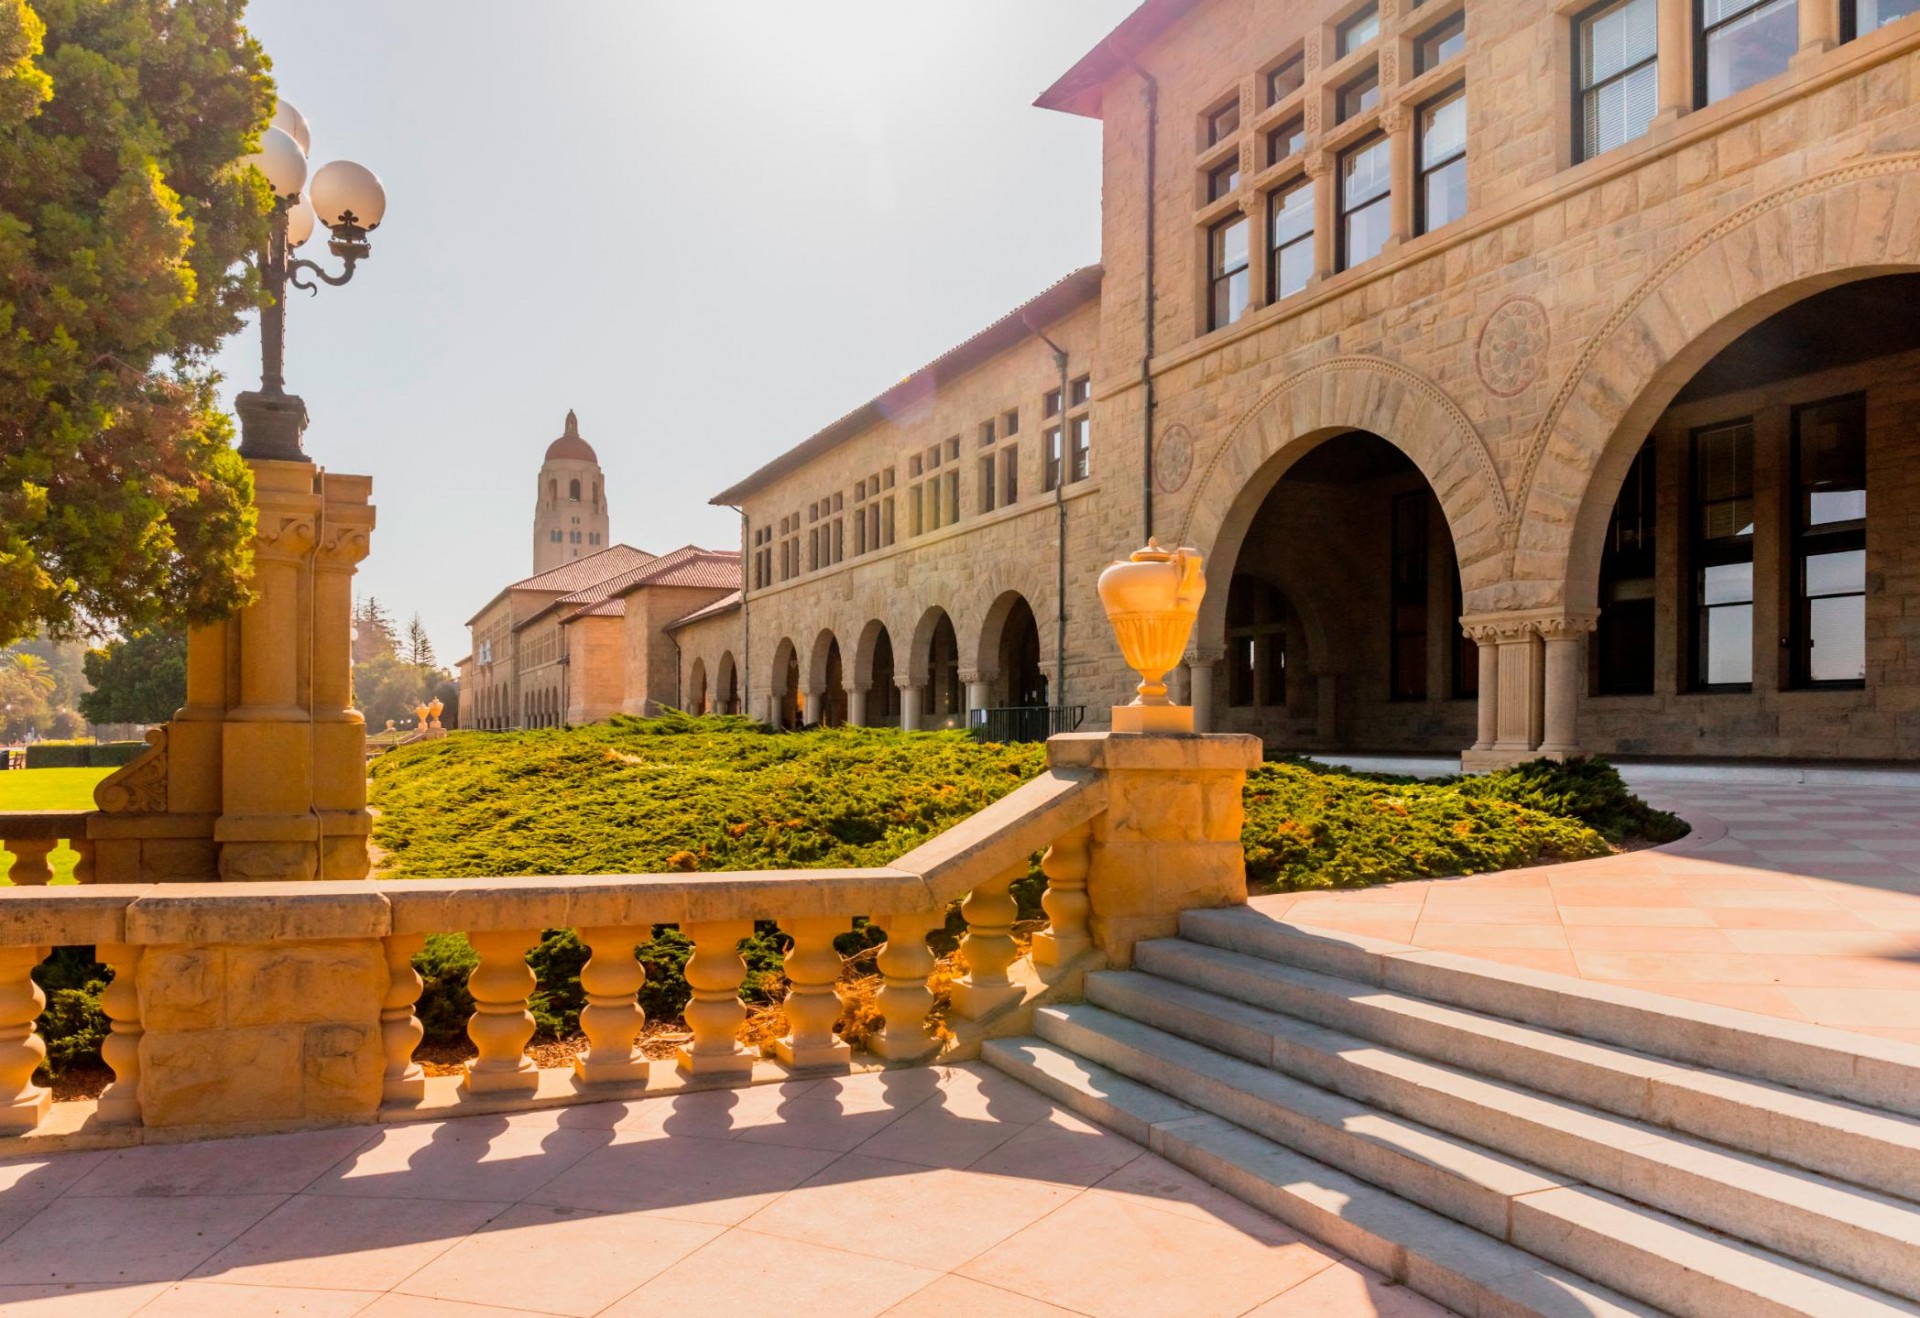 Top 10+ Most Prestigious Schools for Data Science In the US Today